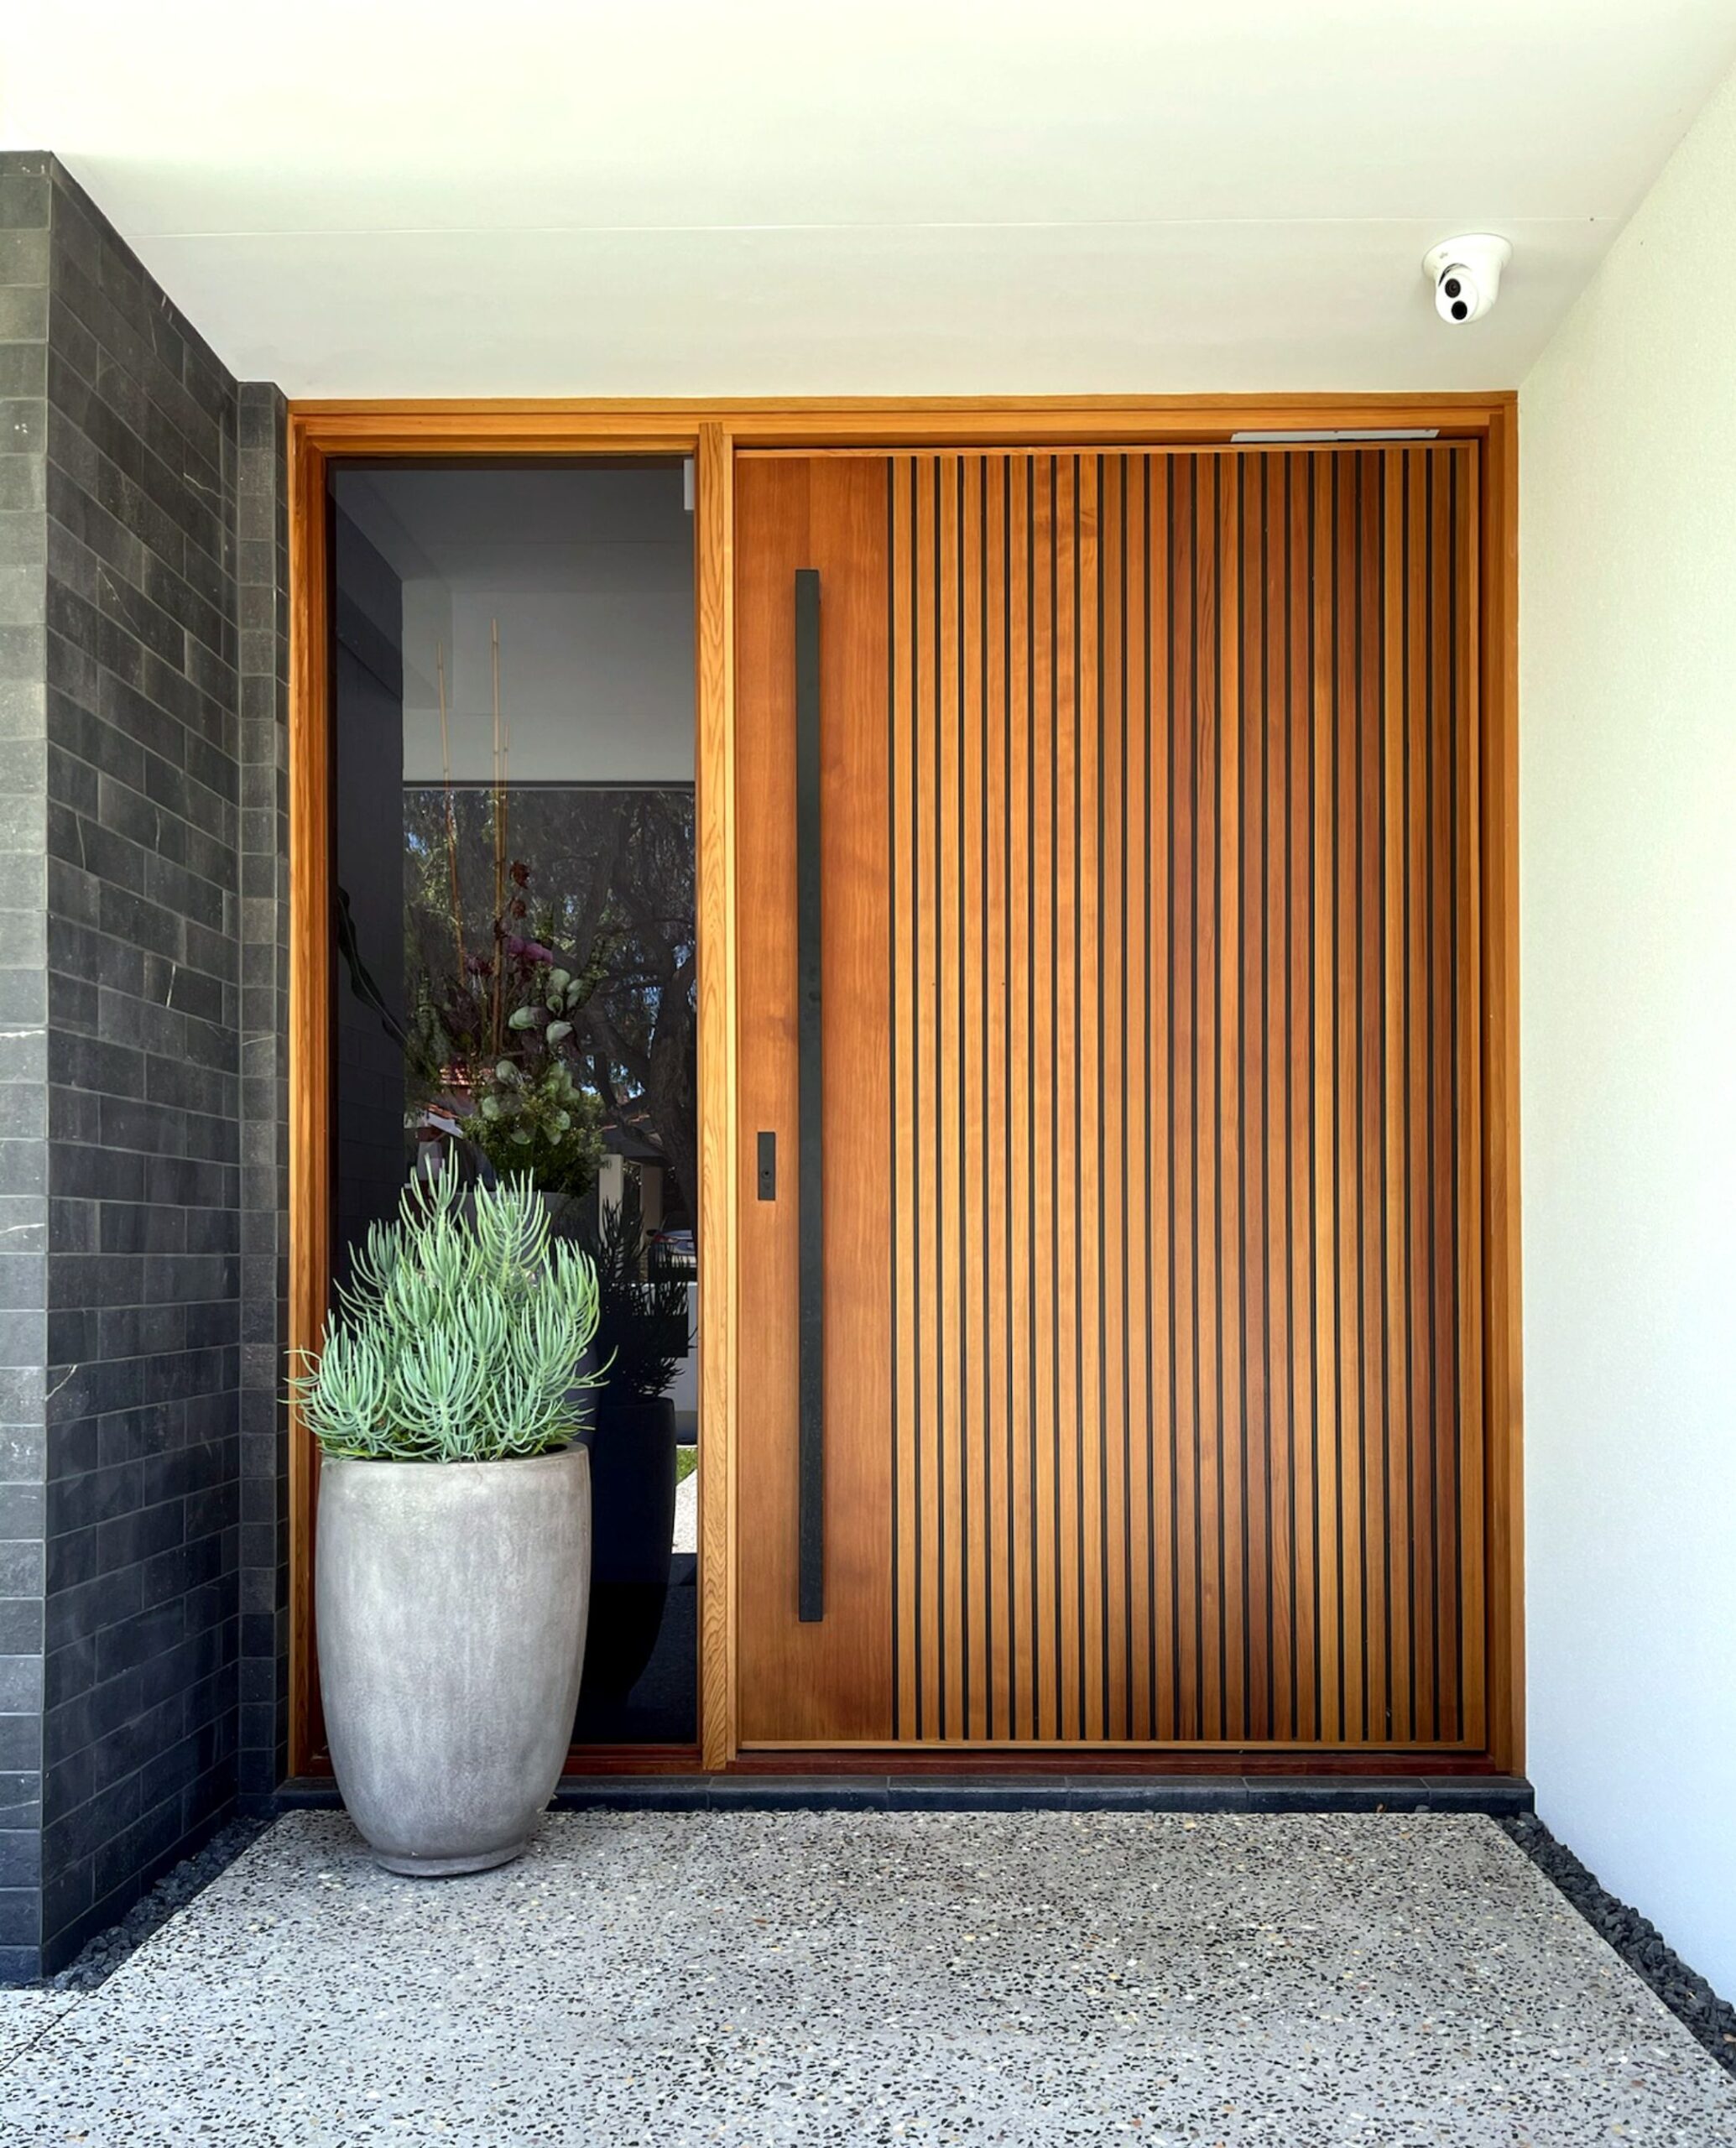 A Guide to Choosing the Right Entry Door
for Your Home